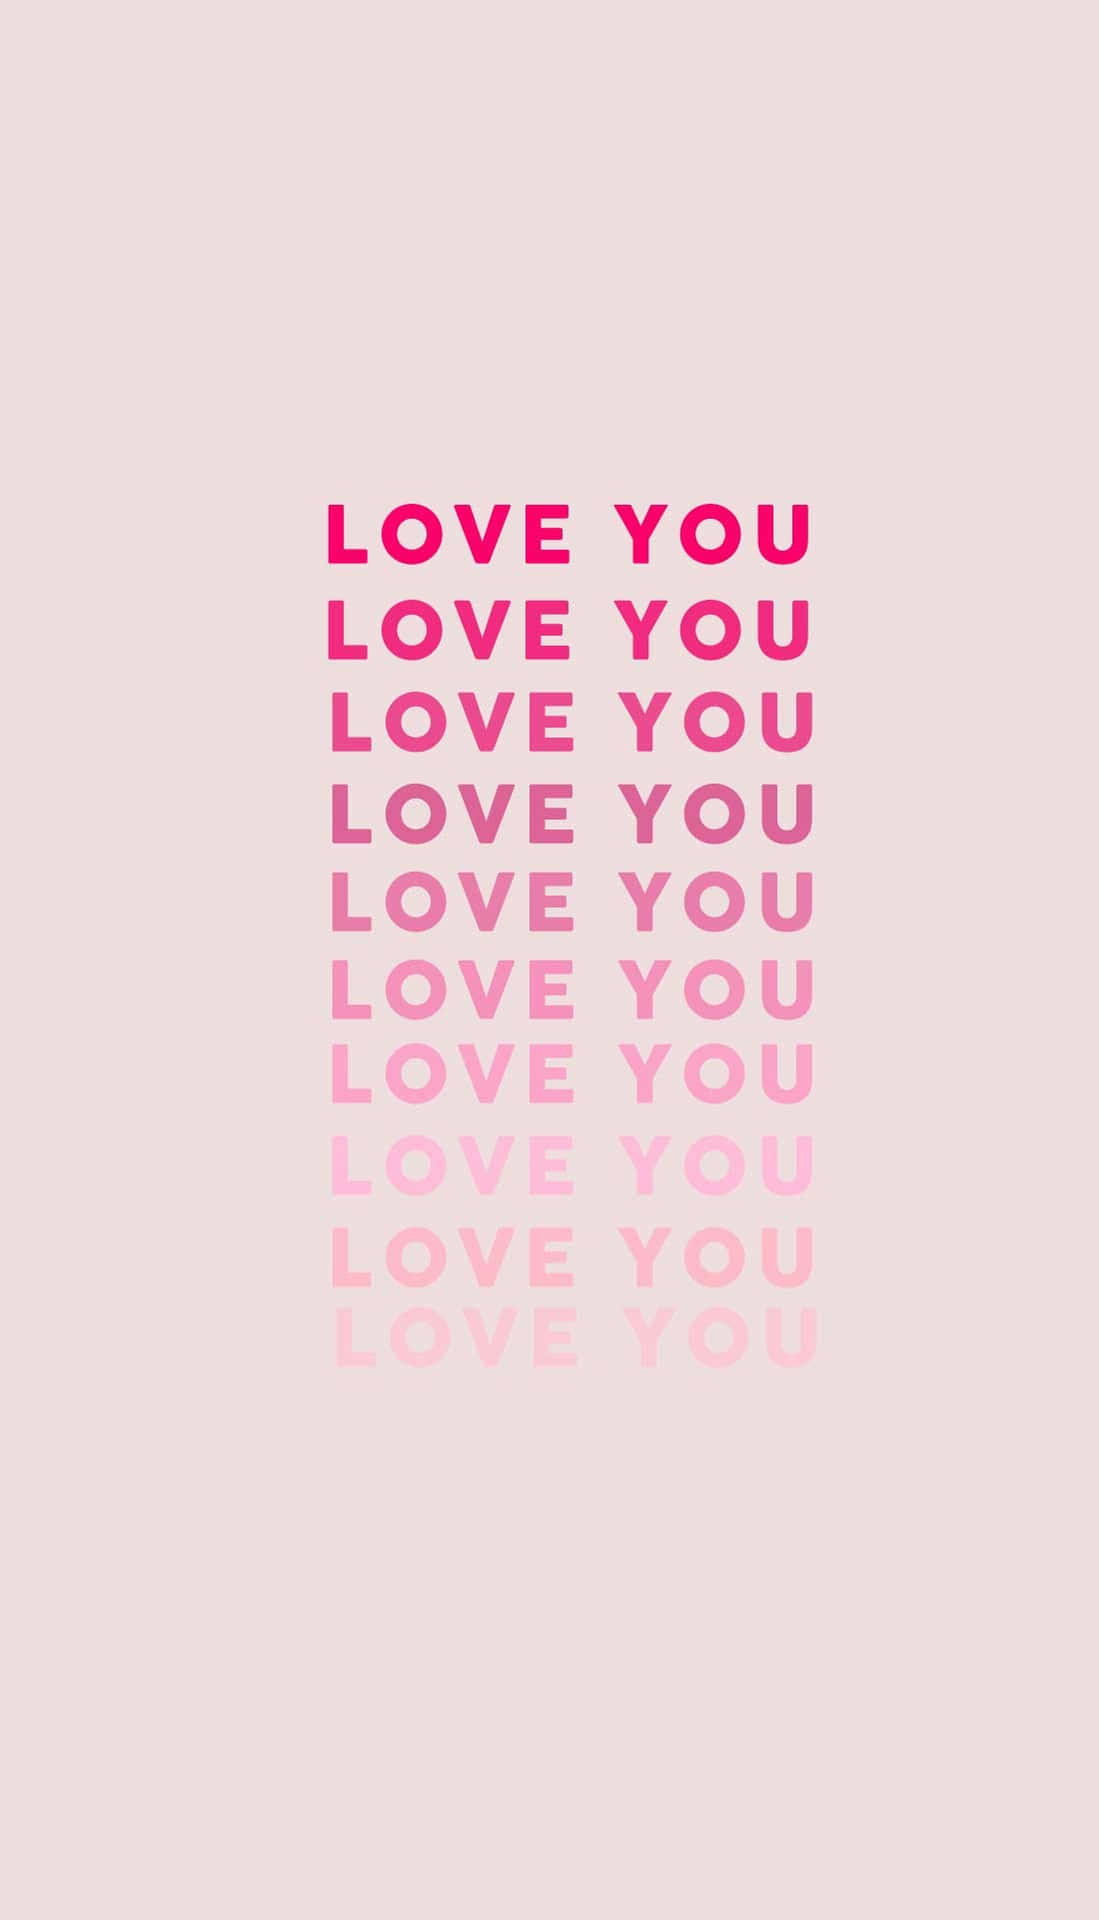 Image  Spread the Love this Valentines Day- Phone Wallpaper